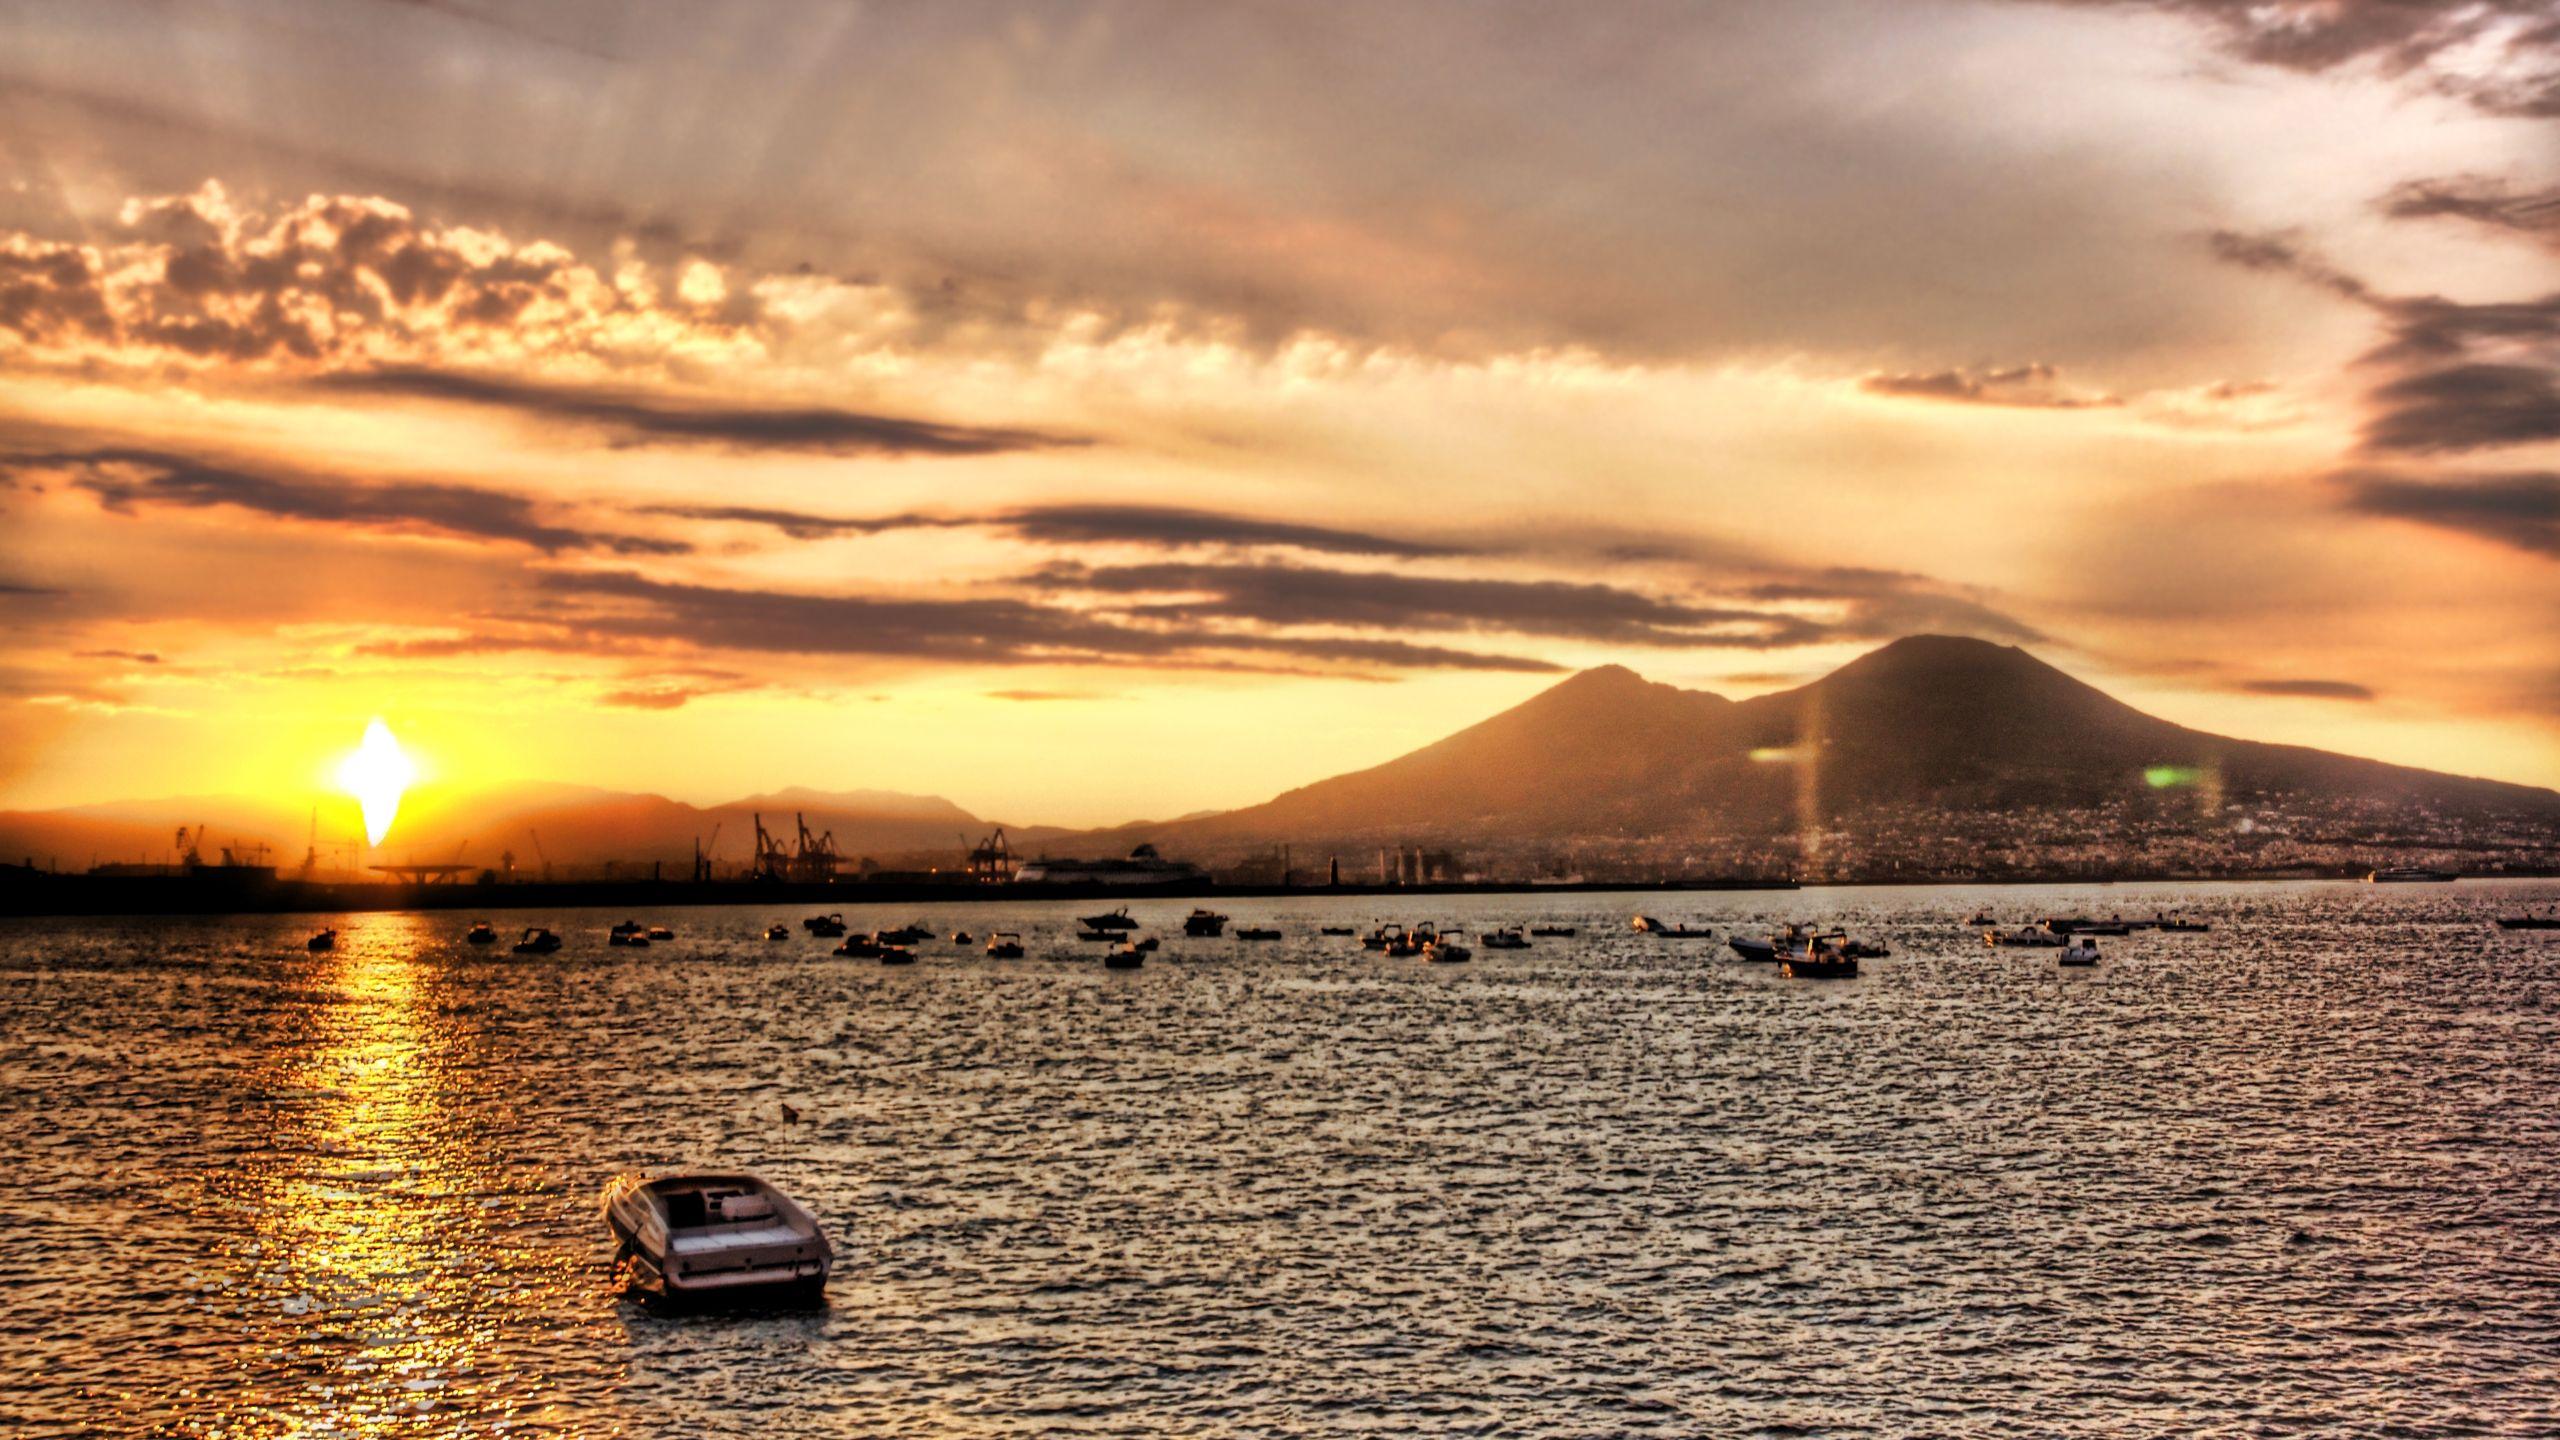 Pompeii and Mount Vesuvius by morning widescreen wallpaper. Wide